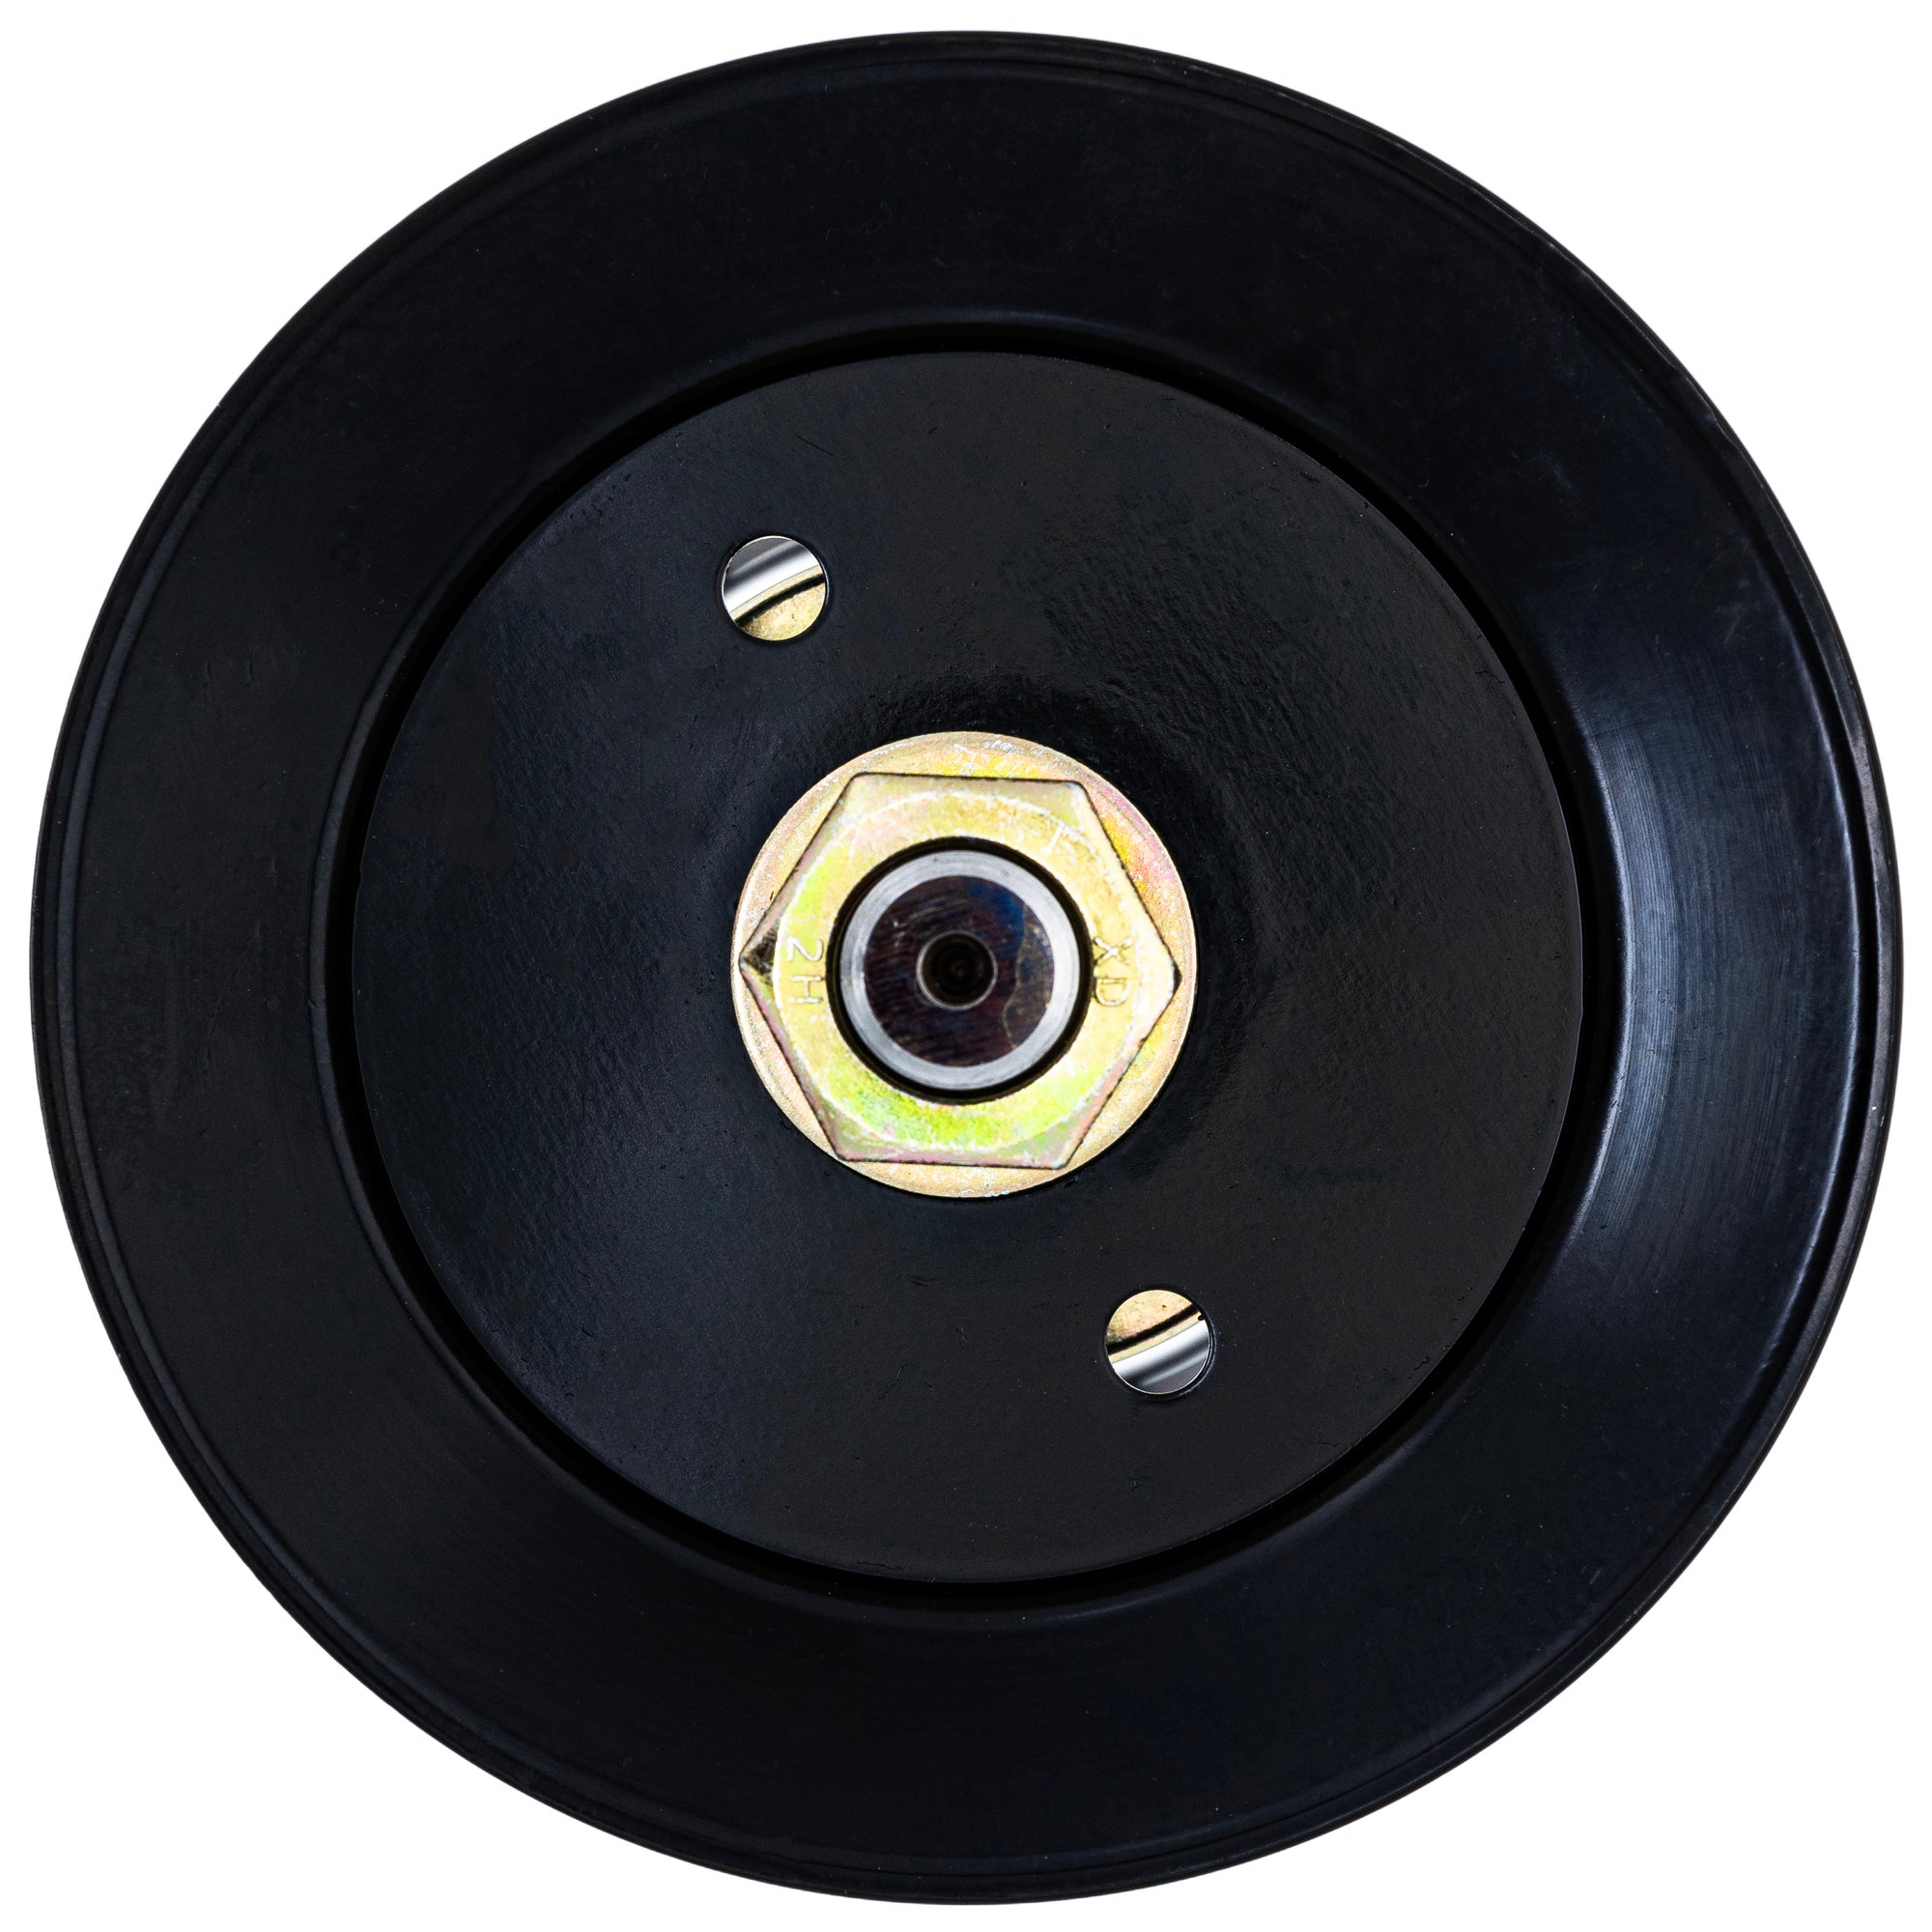 Mower Spindle for Exmark Lazer Z CT HP 1-323532 1-653099 44-Inch Deck